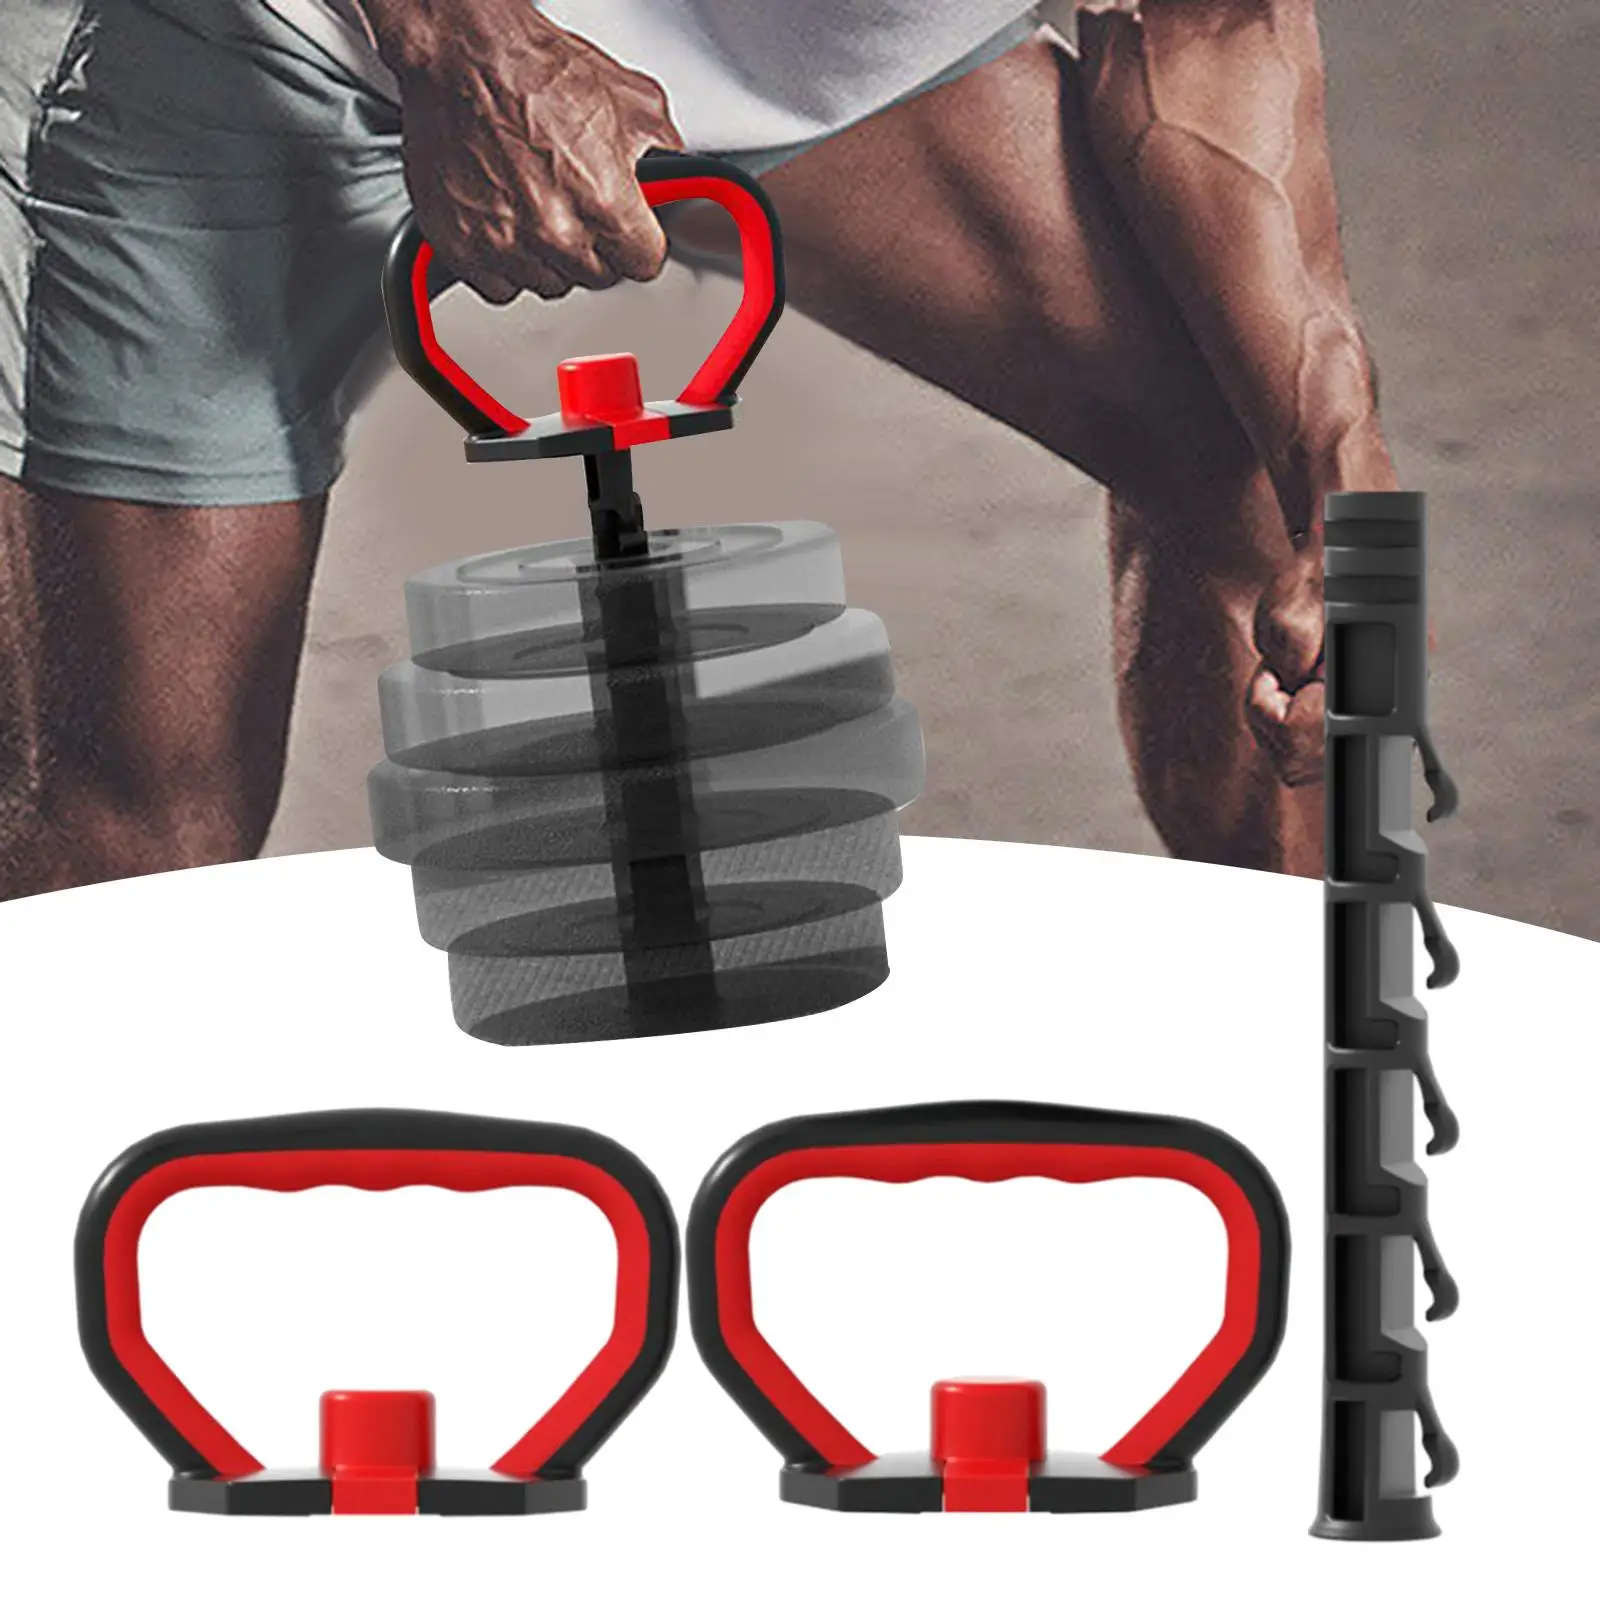 Adjustable Kettlebell Handle with Base Dumbbell Grip Home Gym Workout Kettlebell Push up Multifunctional Fitness Kettlebell Grip